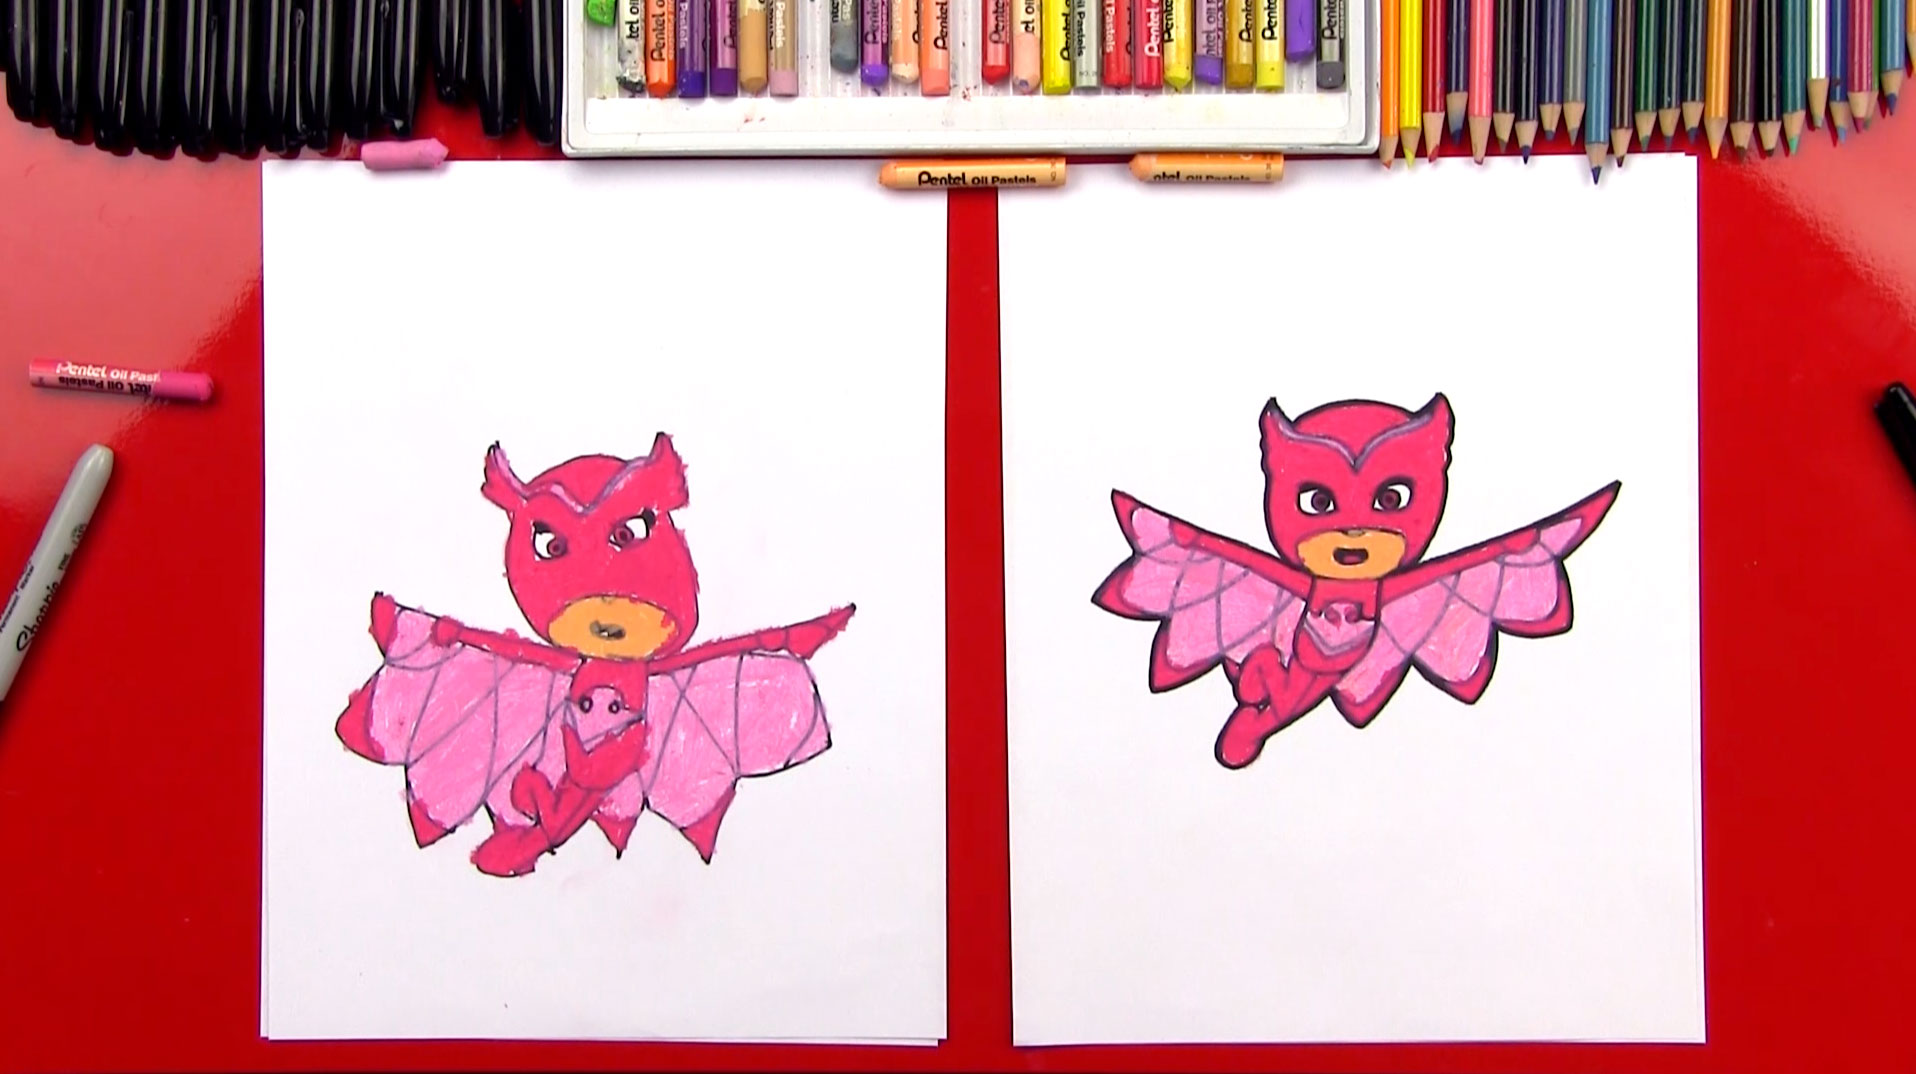 How To Draw Owlette From PJ Masks - Art For Kids Hub.